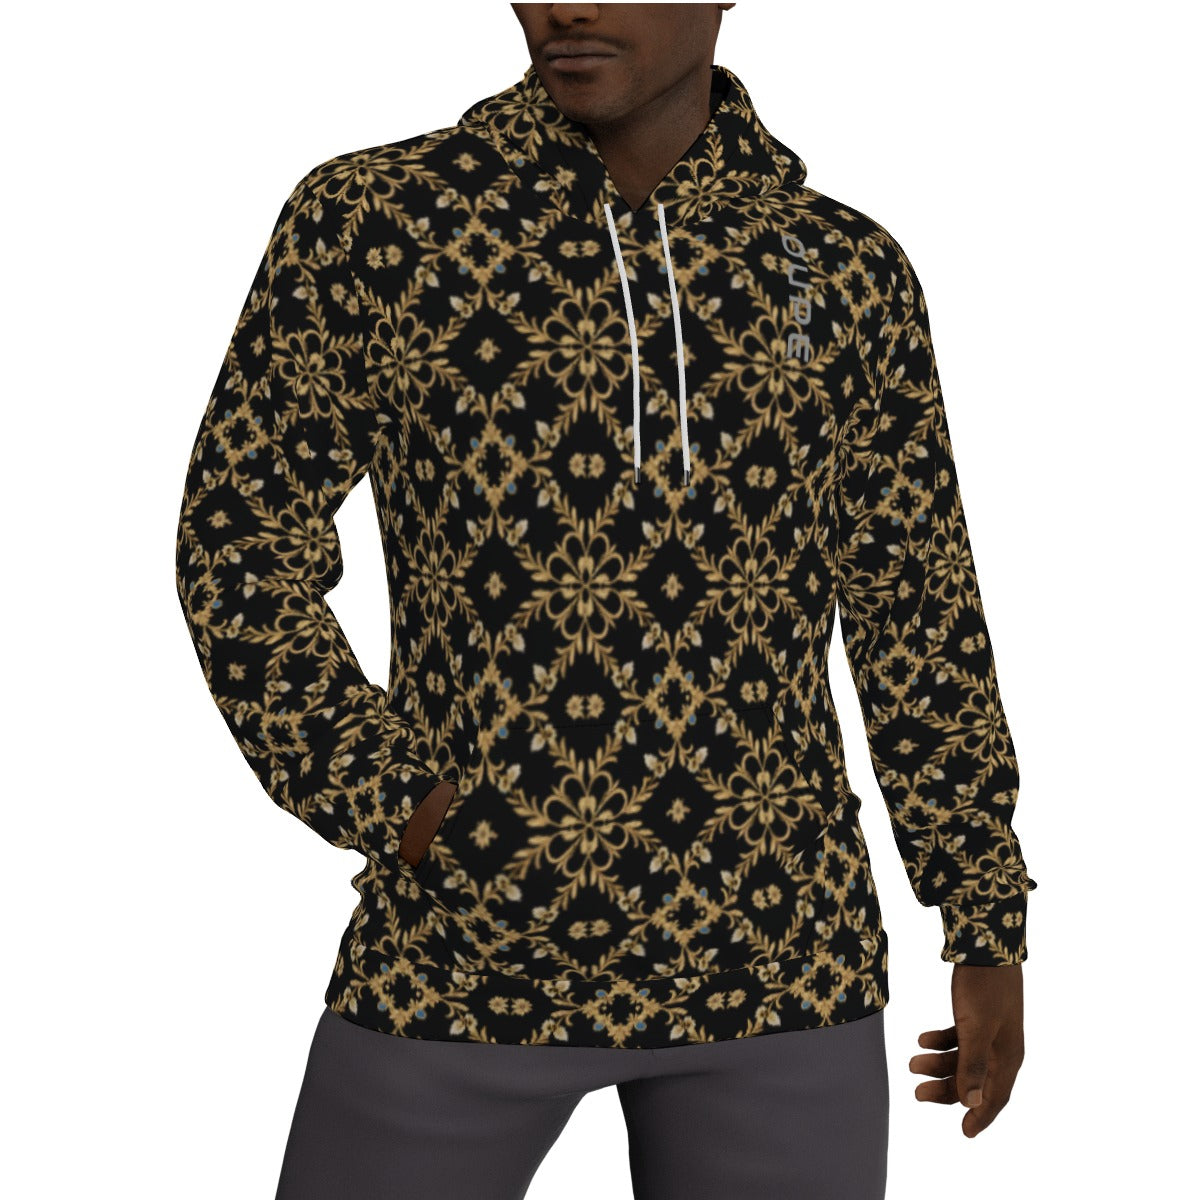 OUPE BAROQUE Men's SWEATER HOODIE